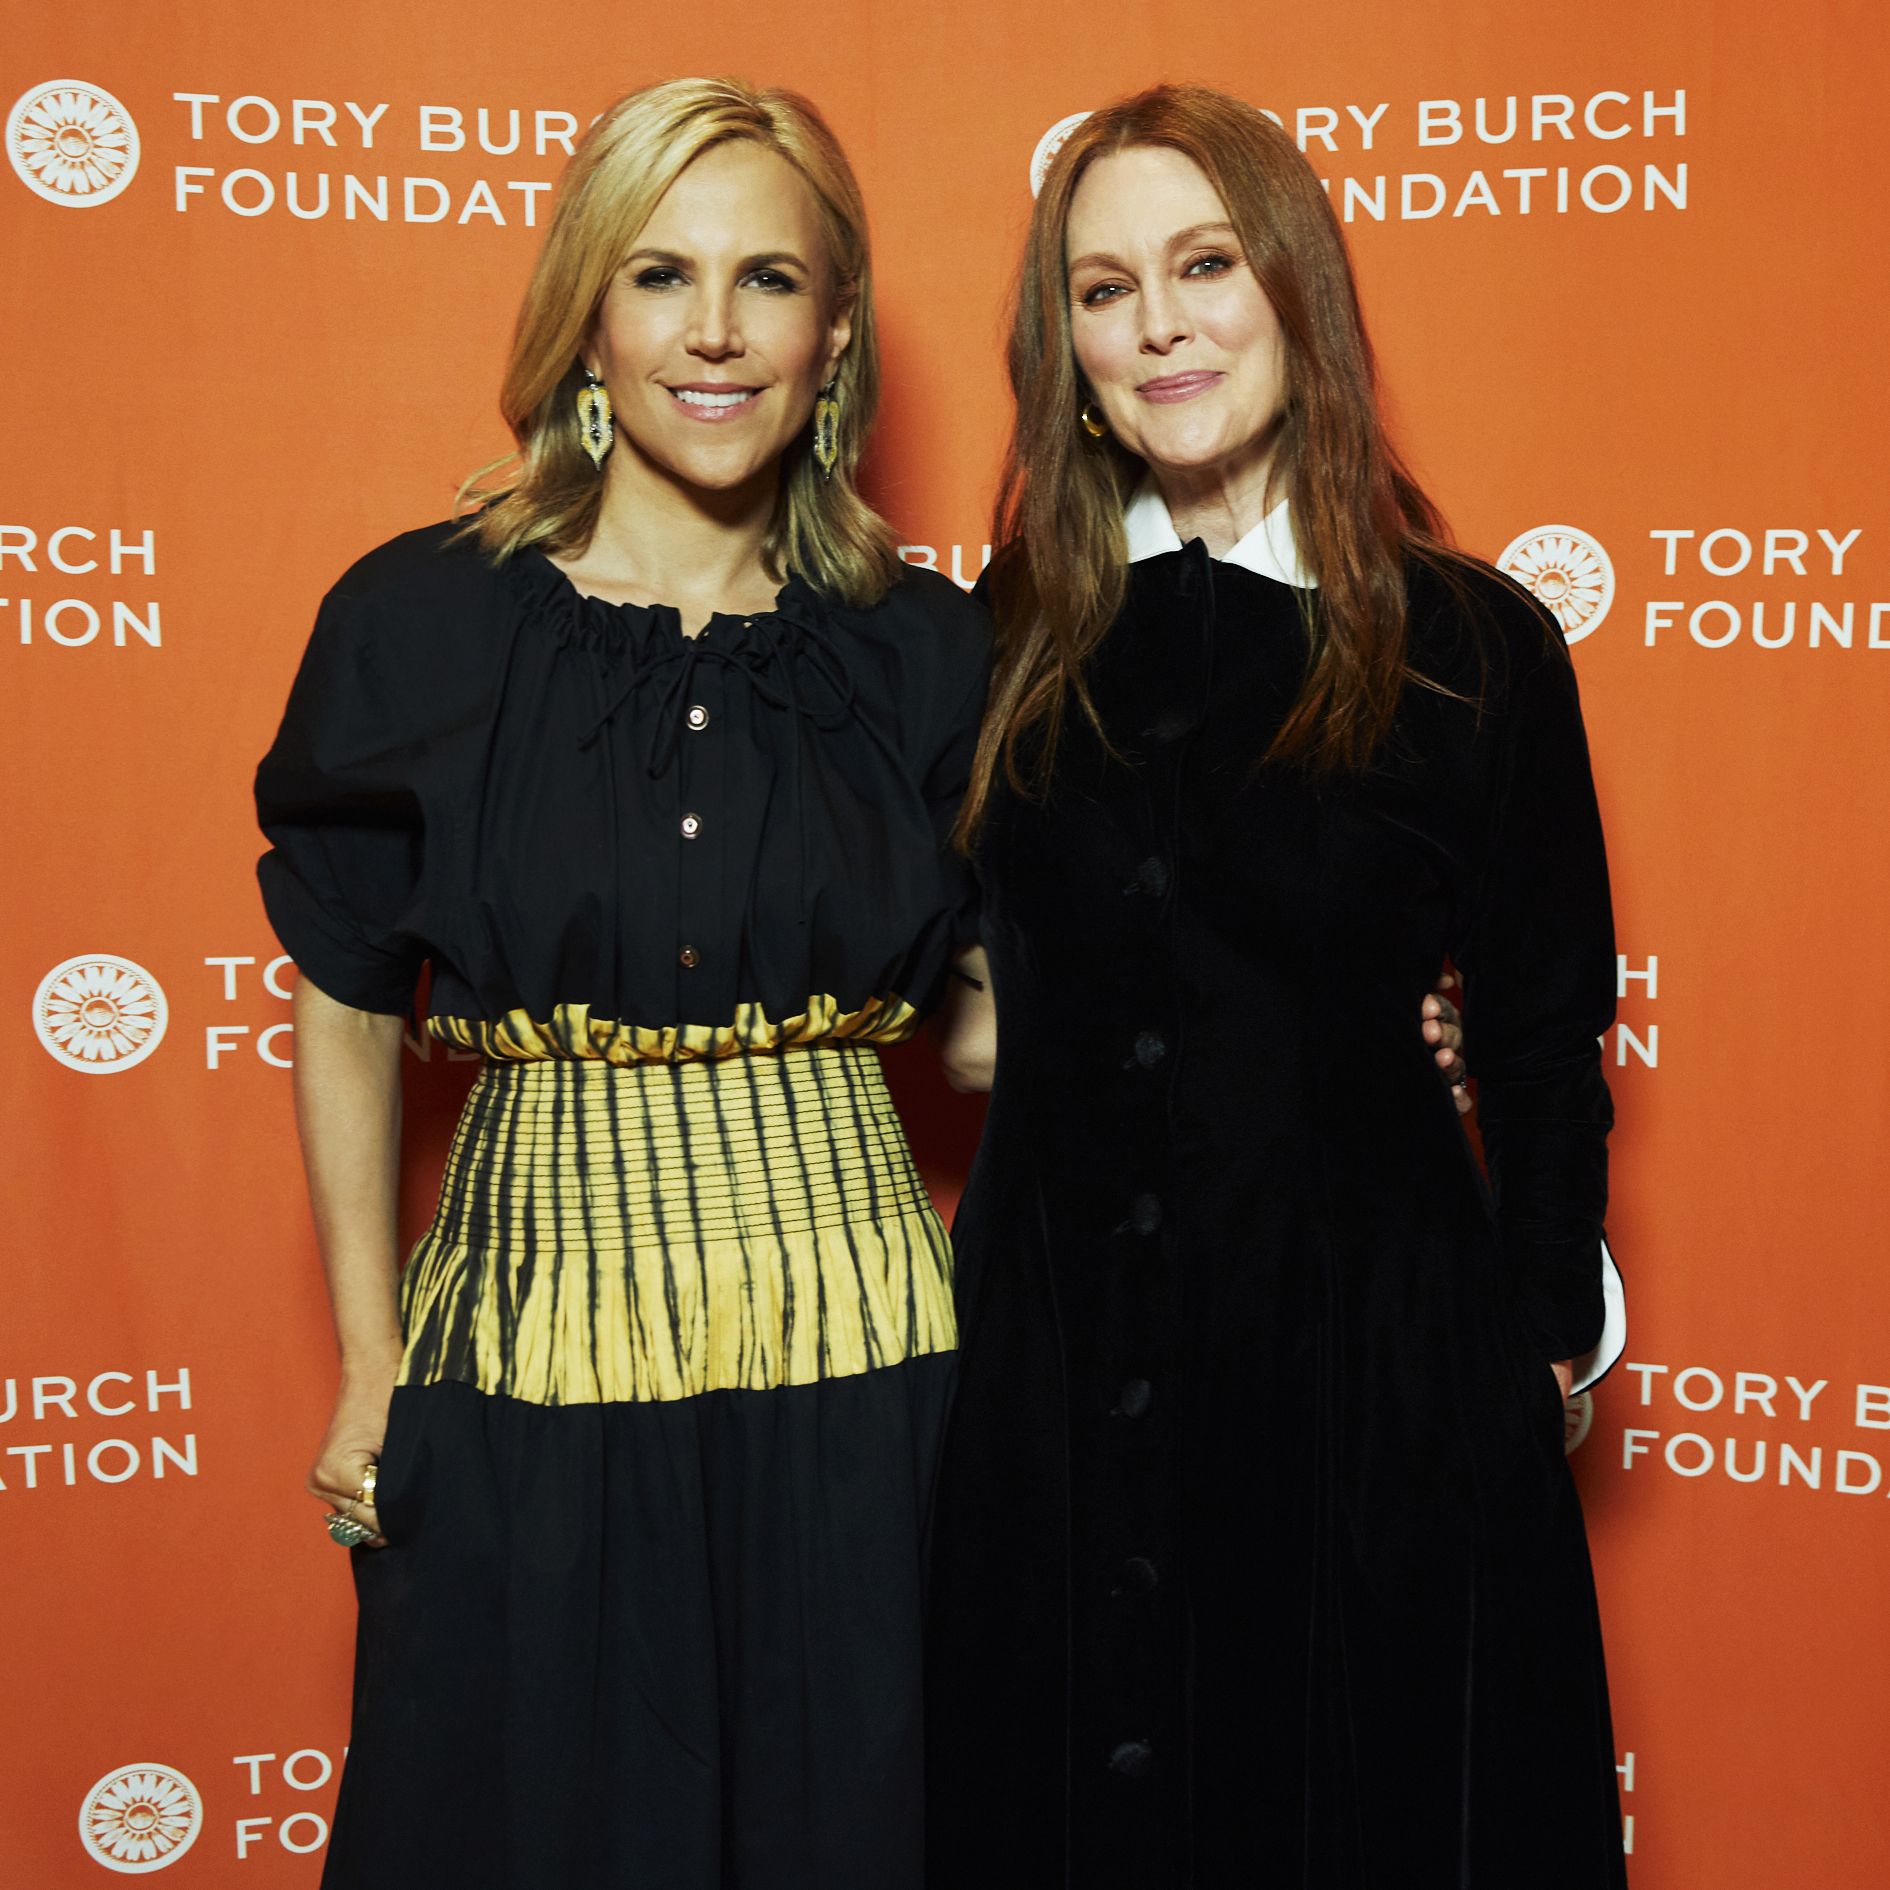 At the Embrace Ambition summit, the designer brought together leaders like Julianne Moore and Mindy Kaling to discuss confronting stereotypes and creating new norms.